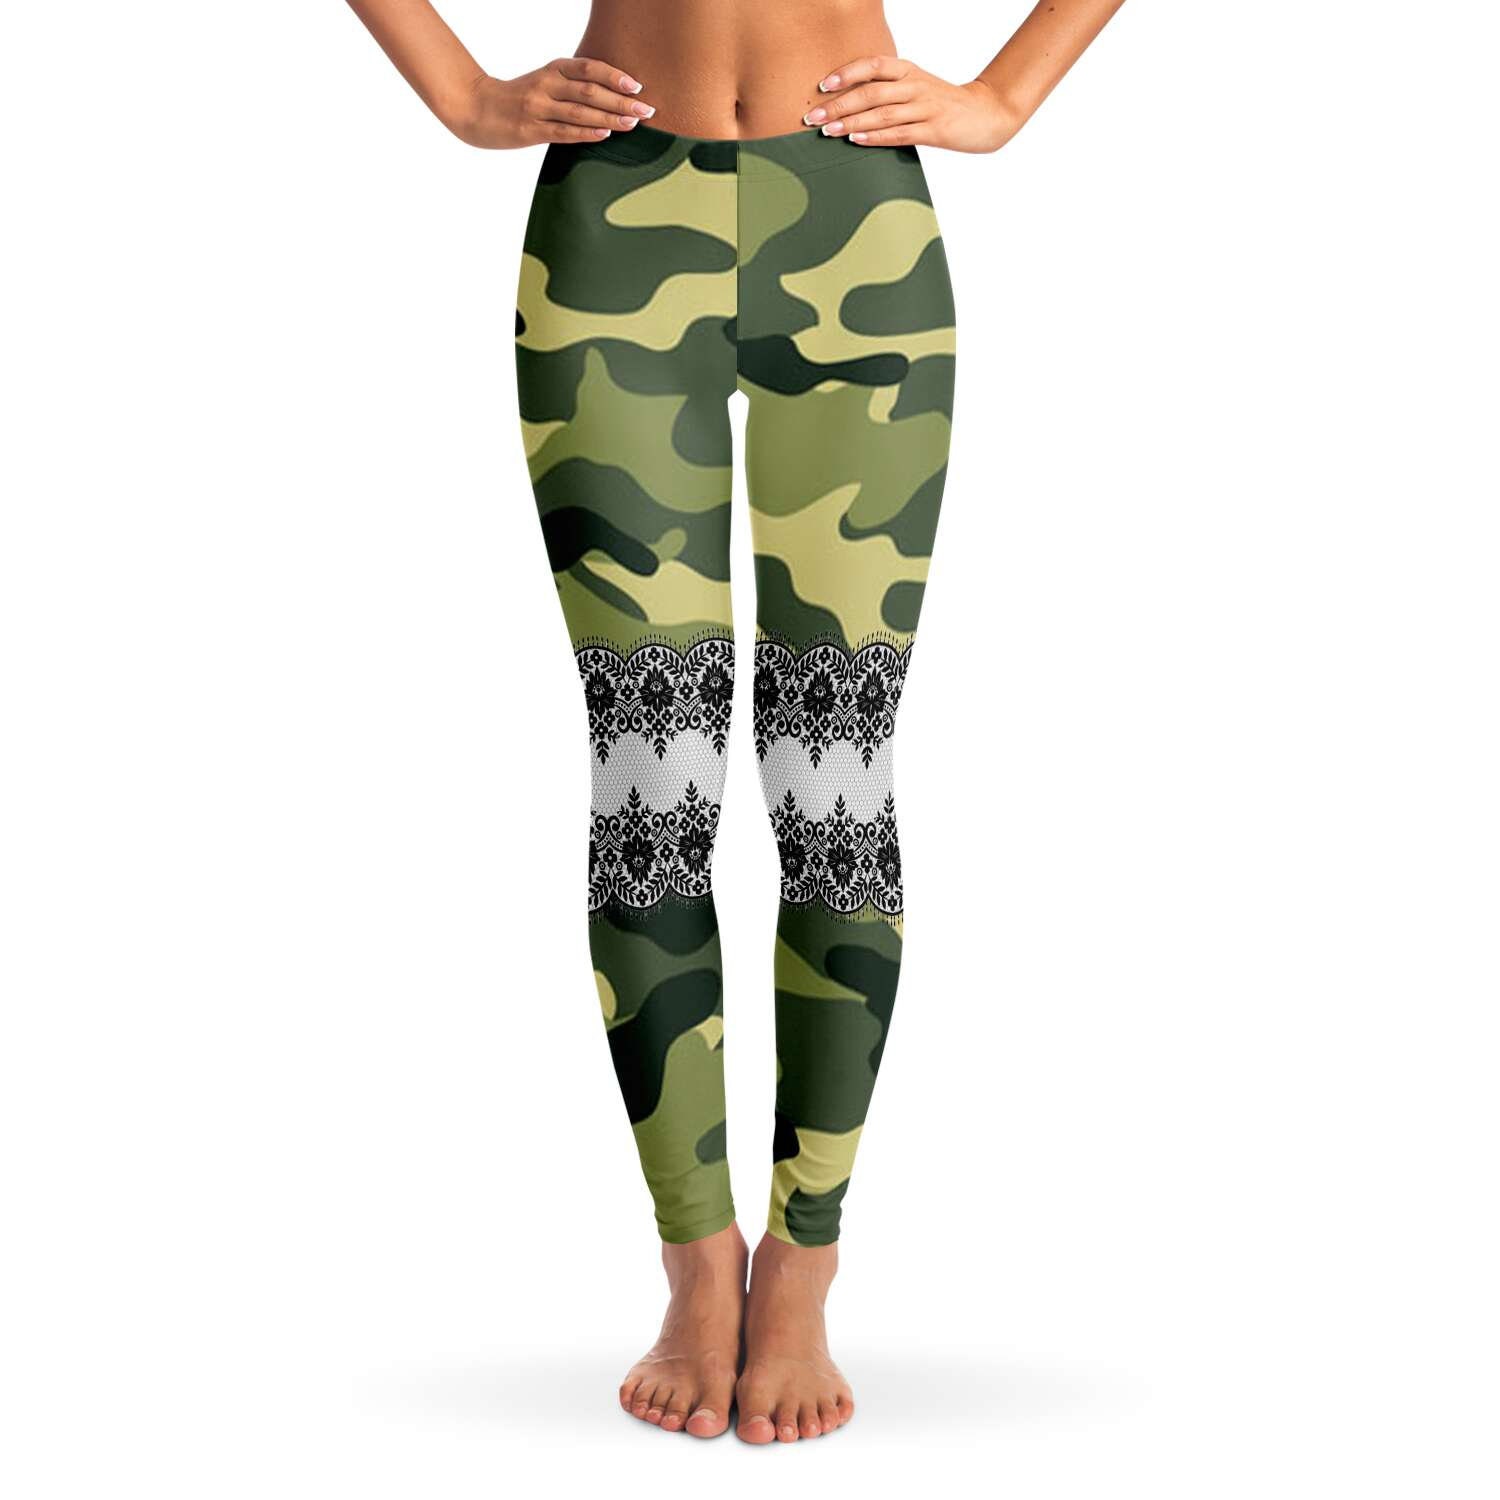 Green Camouflage Lace Leggings For Women Army camo casual | Etsy